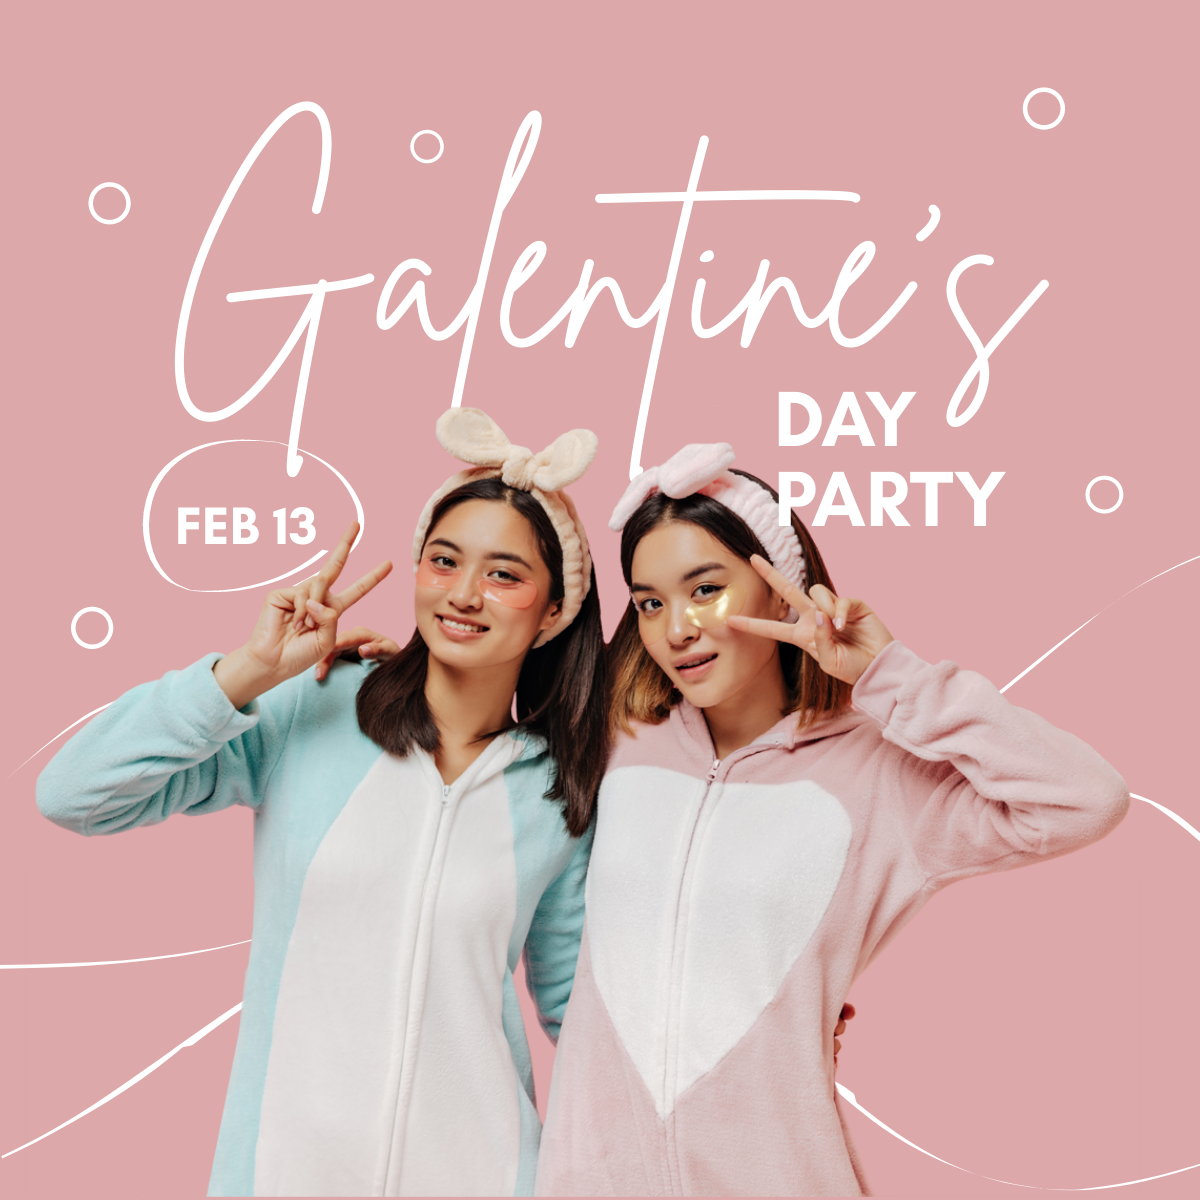 Galentines Day Party Linkedin Post Template